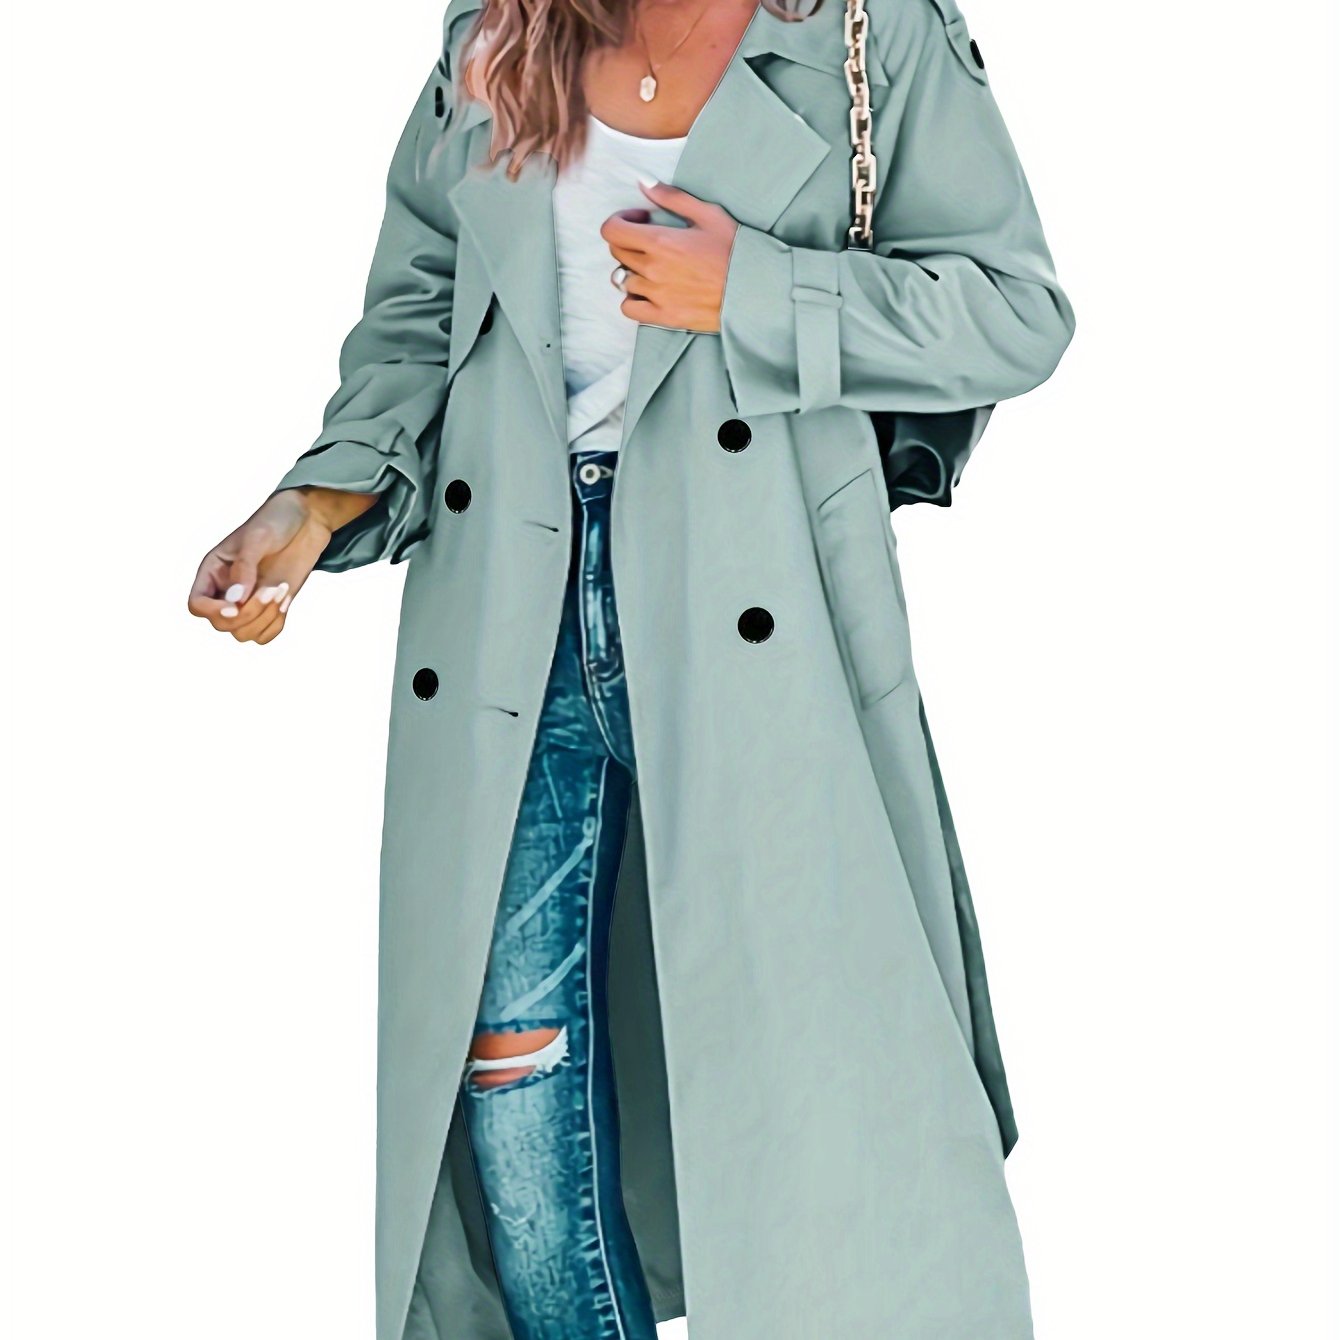 Antmvs Double Breasted Solid Trench Coat, Casual Long Sleeve Mid Length Outerwear, Women's Clothing